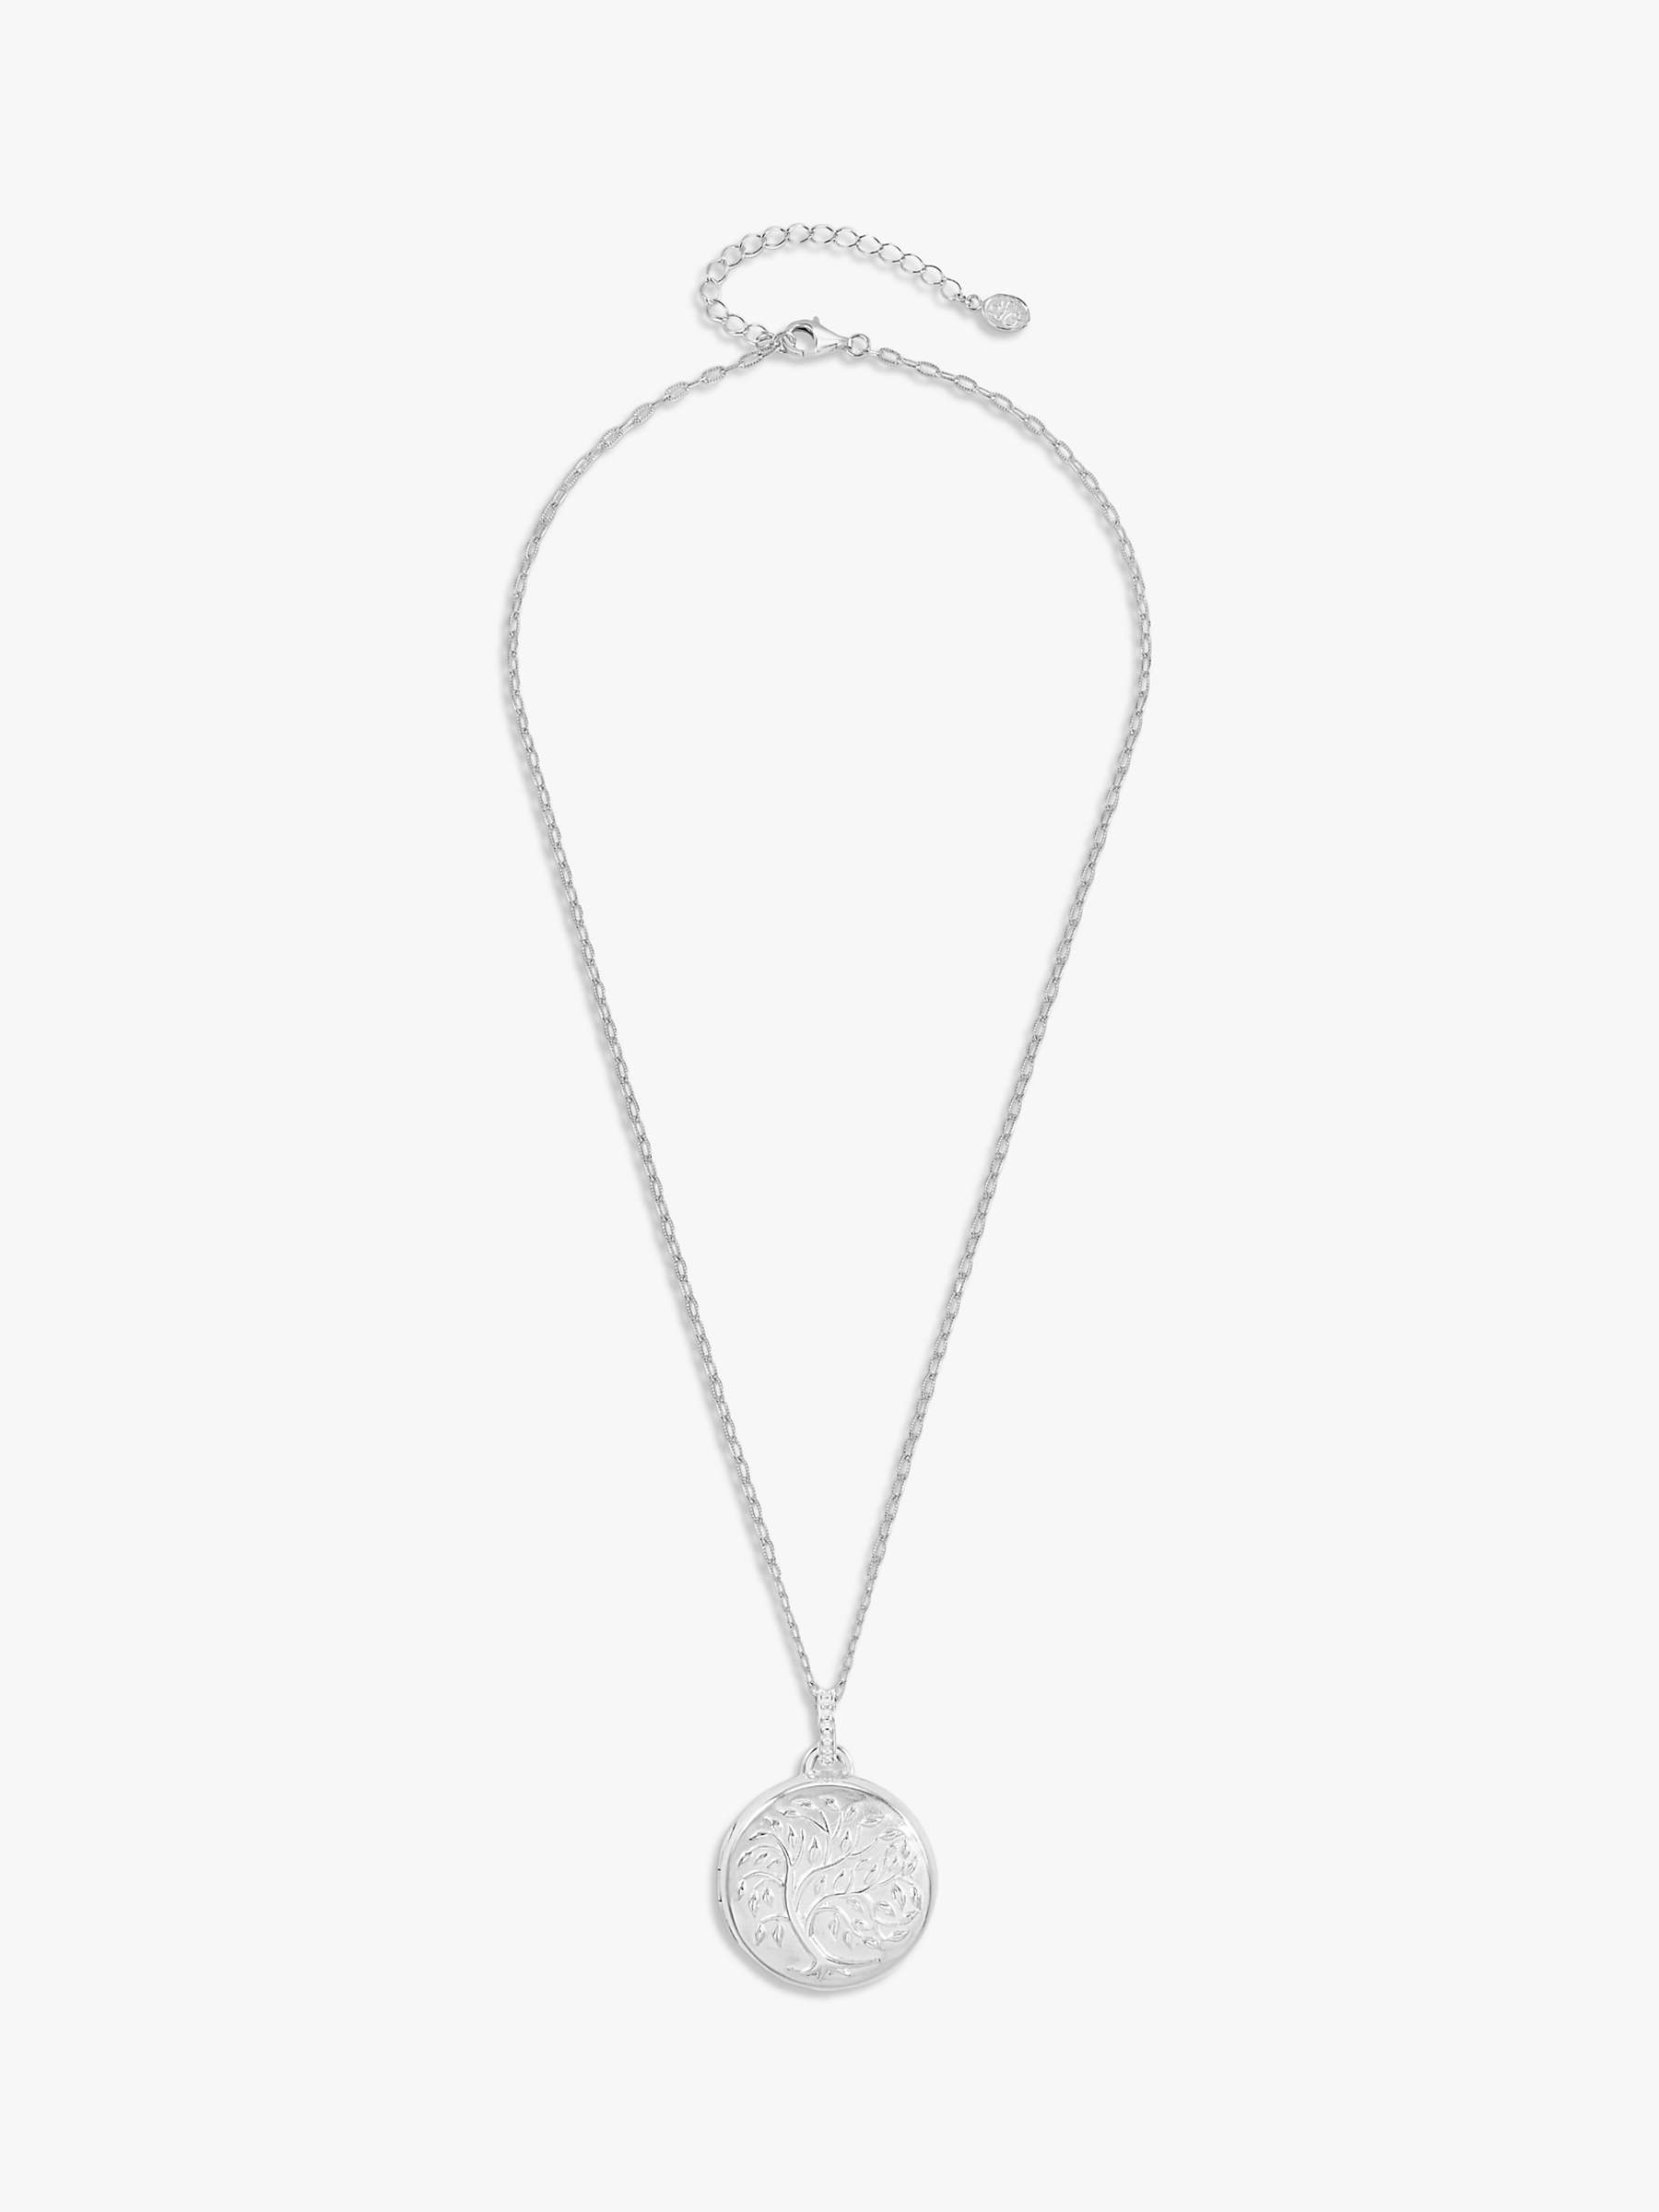 Buy Dower & Hall Tree of Life Locket on Textured Mille-Grain Chain Online at johnlewis.com